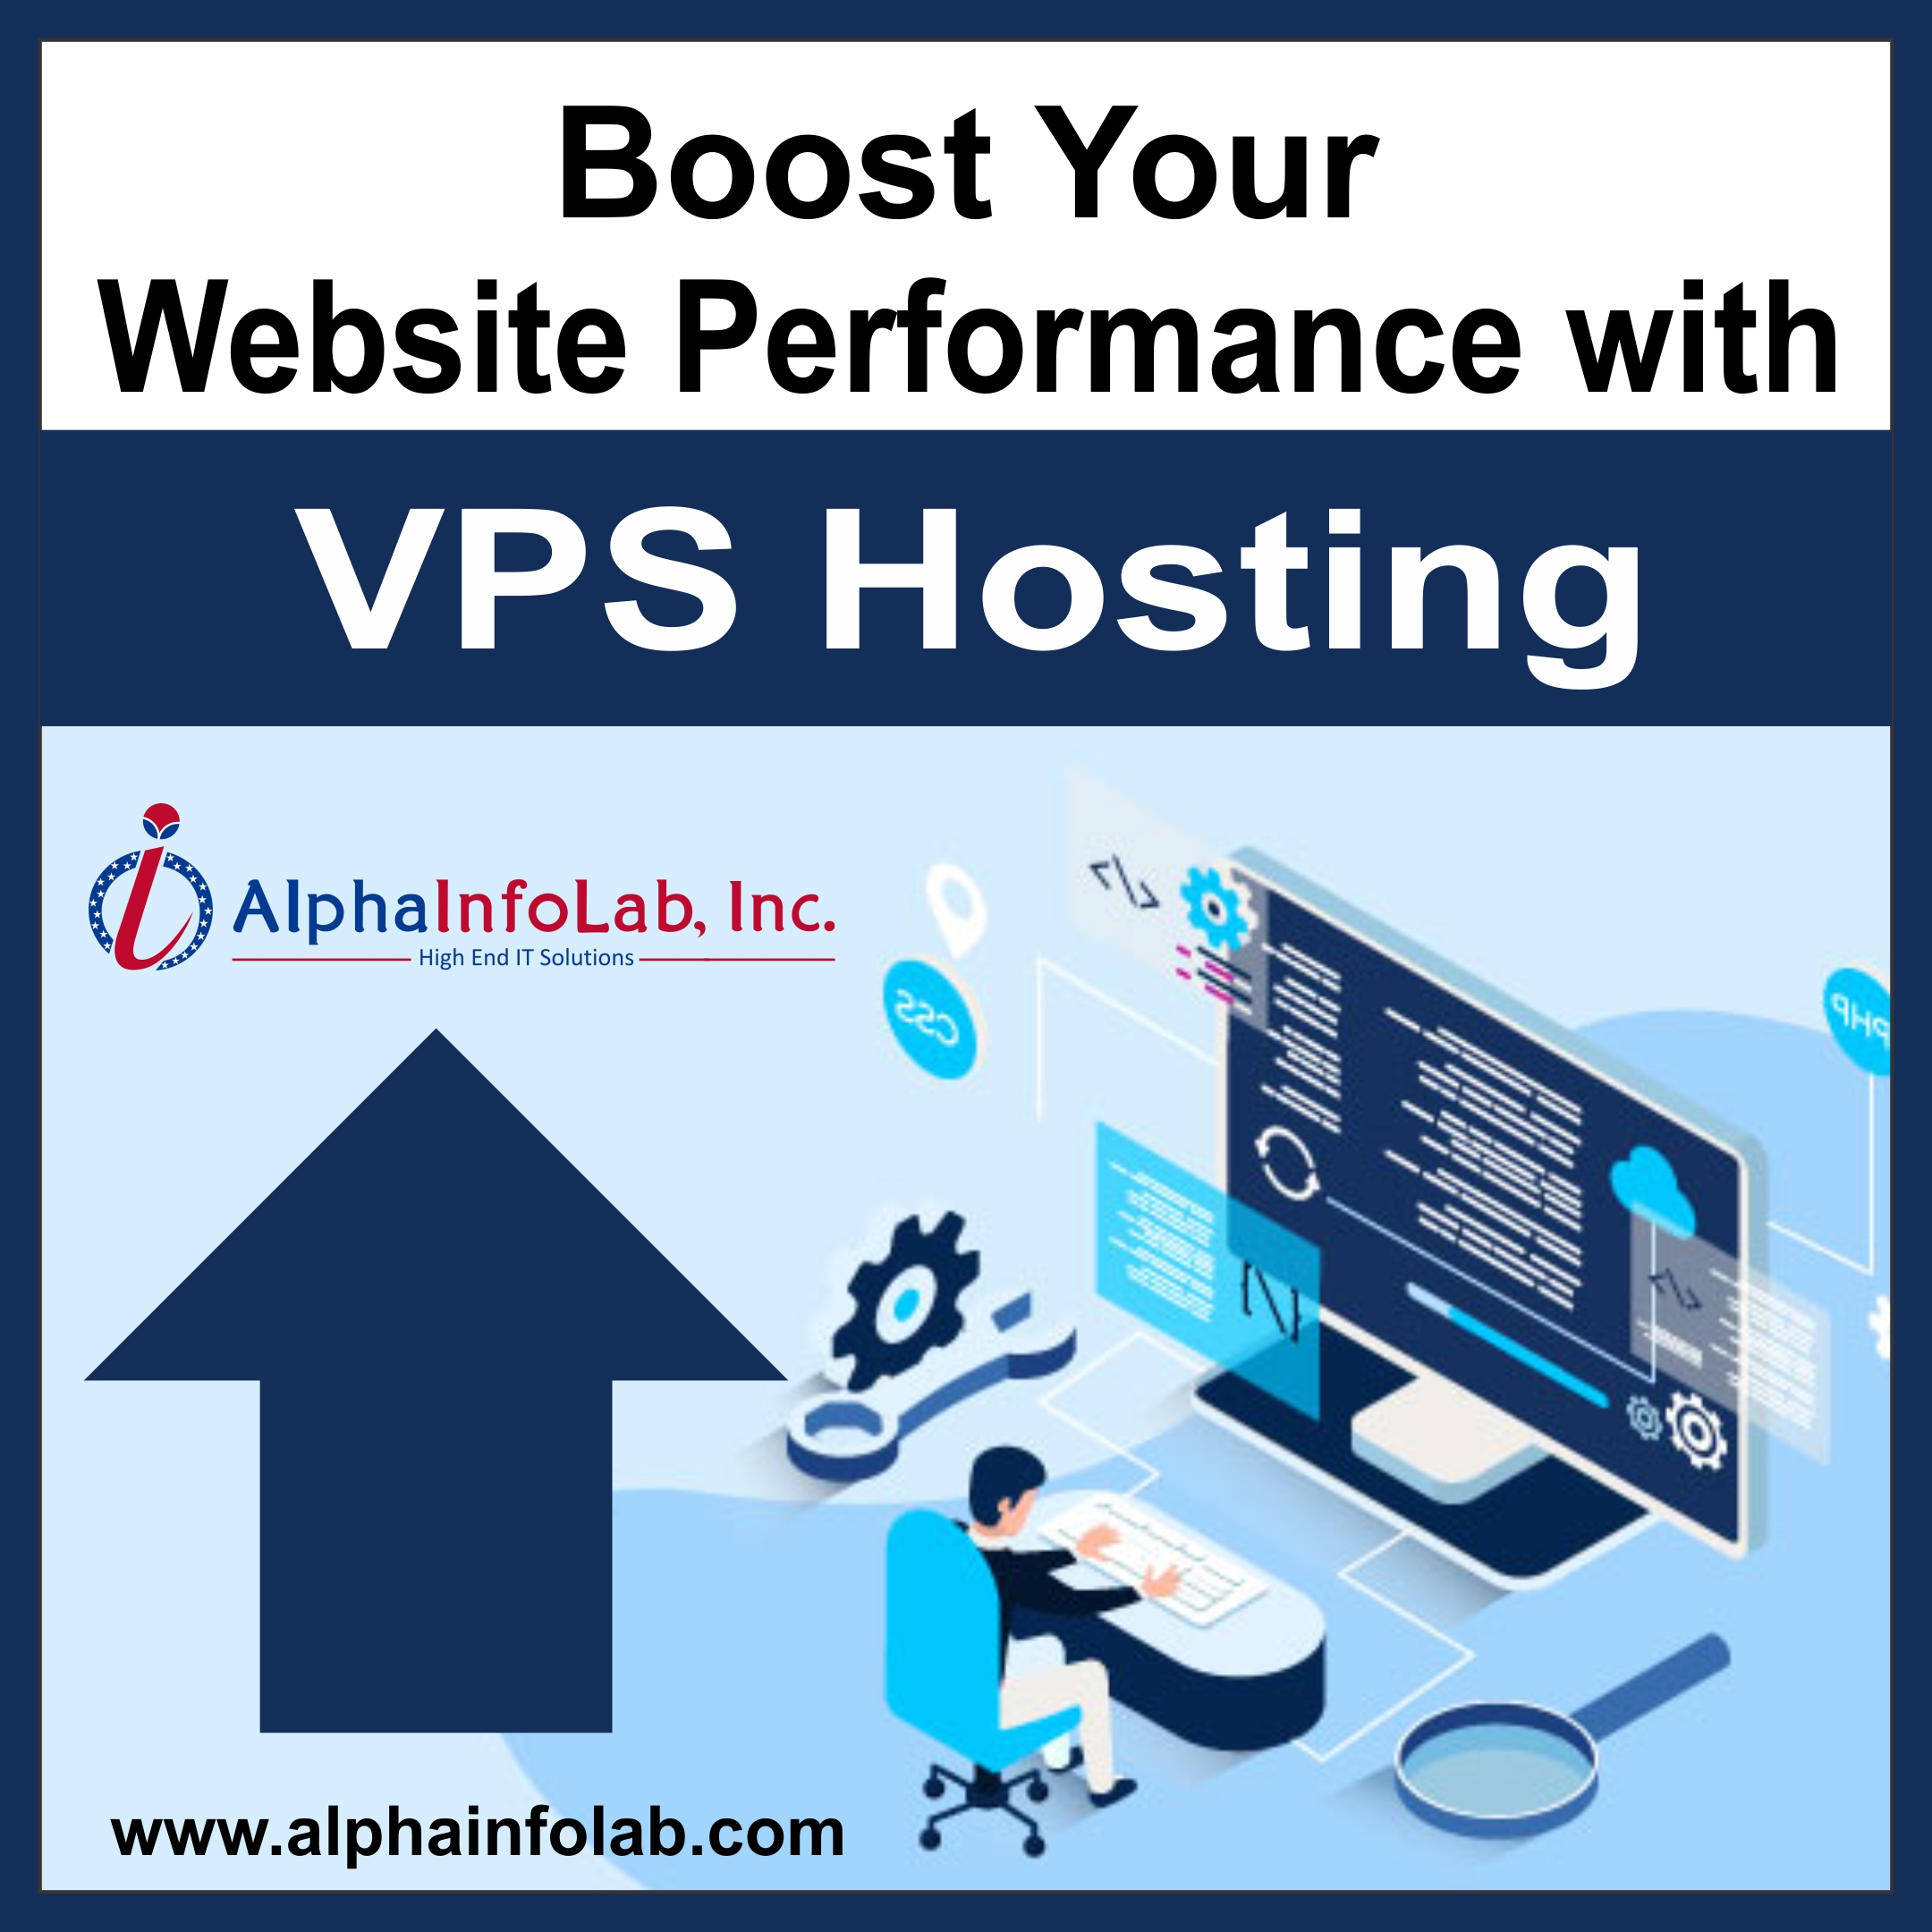 Choose Best VPS Hosting to Boost Your Website Performance